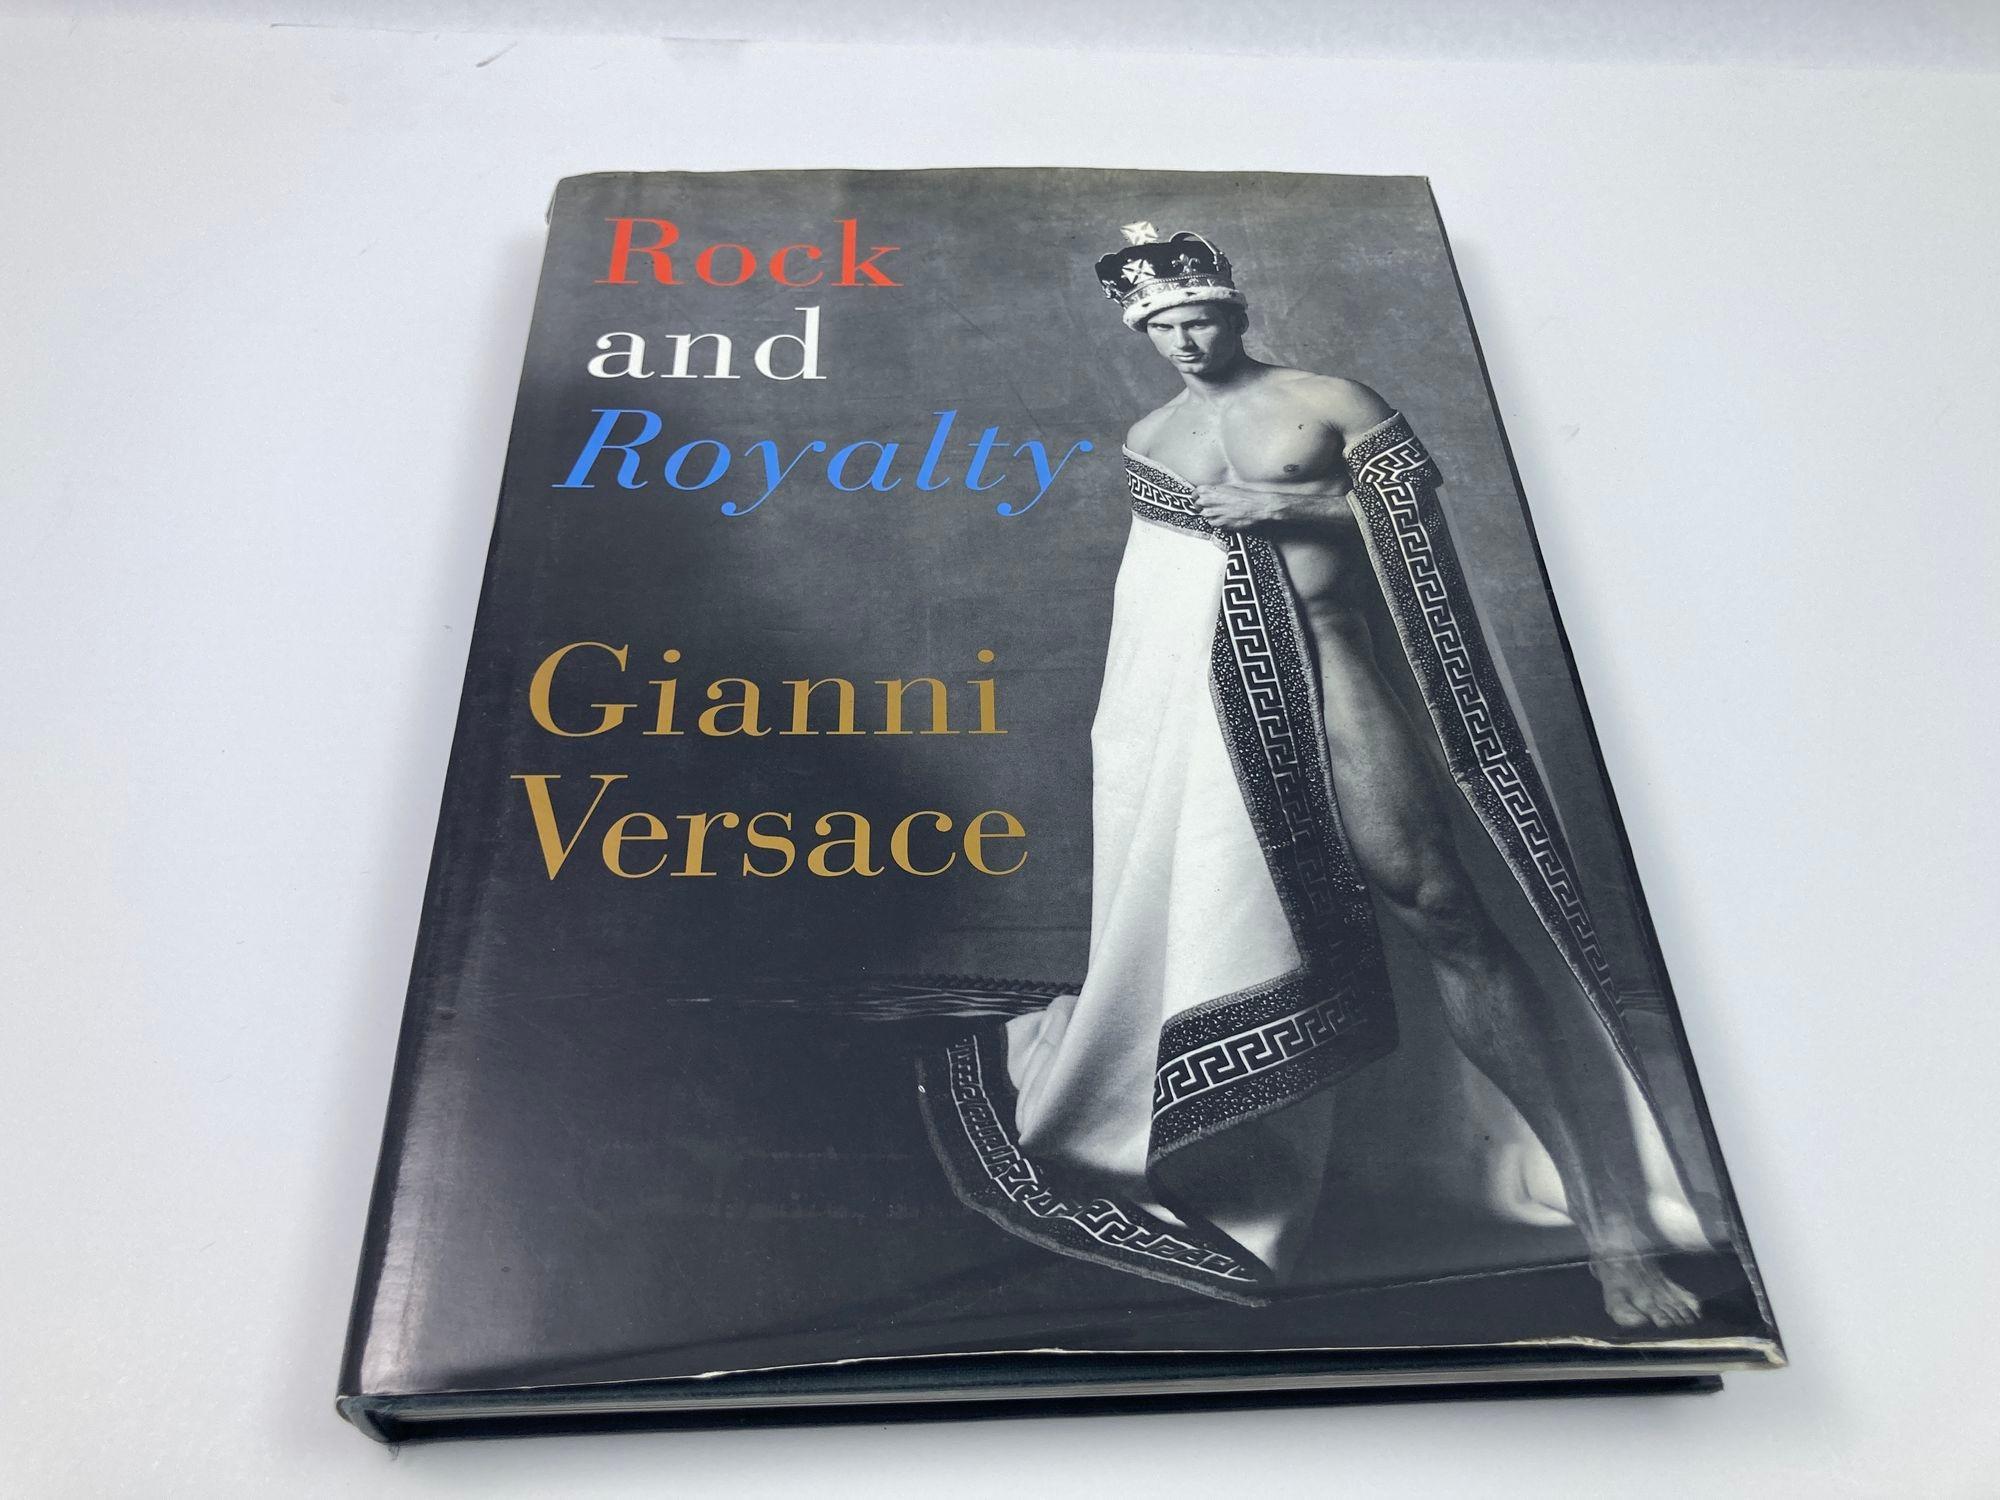 Rock and Royalty Gianni Versace Hardcover Table Book 1st Ed. Large Format For Sale 10